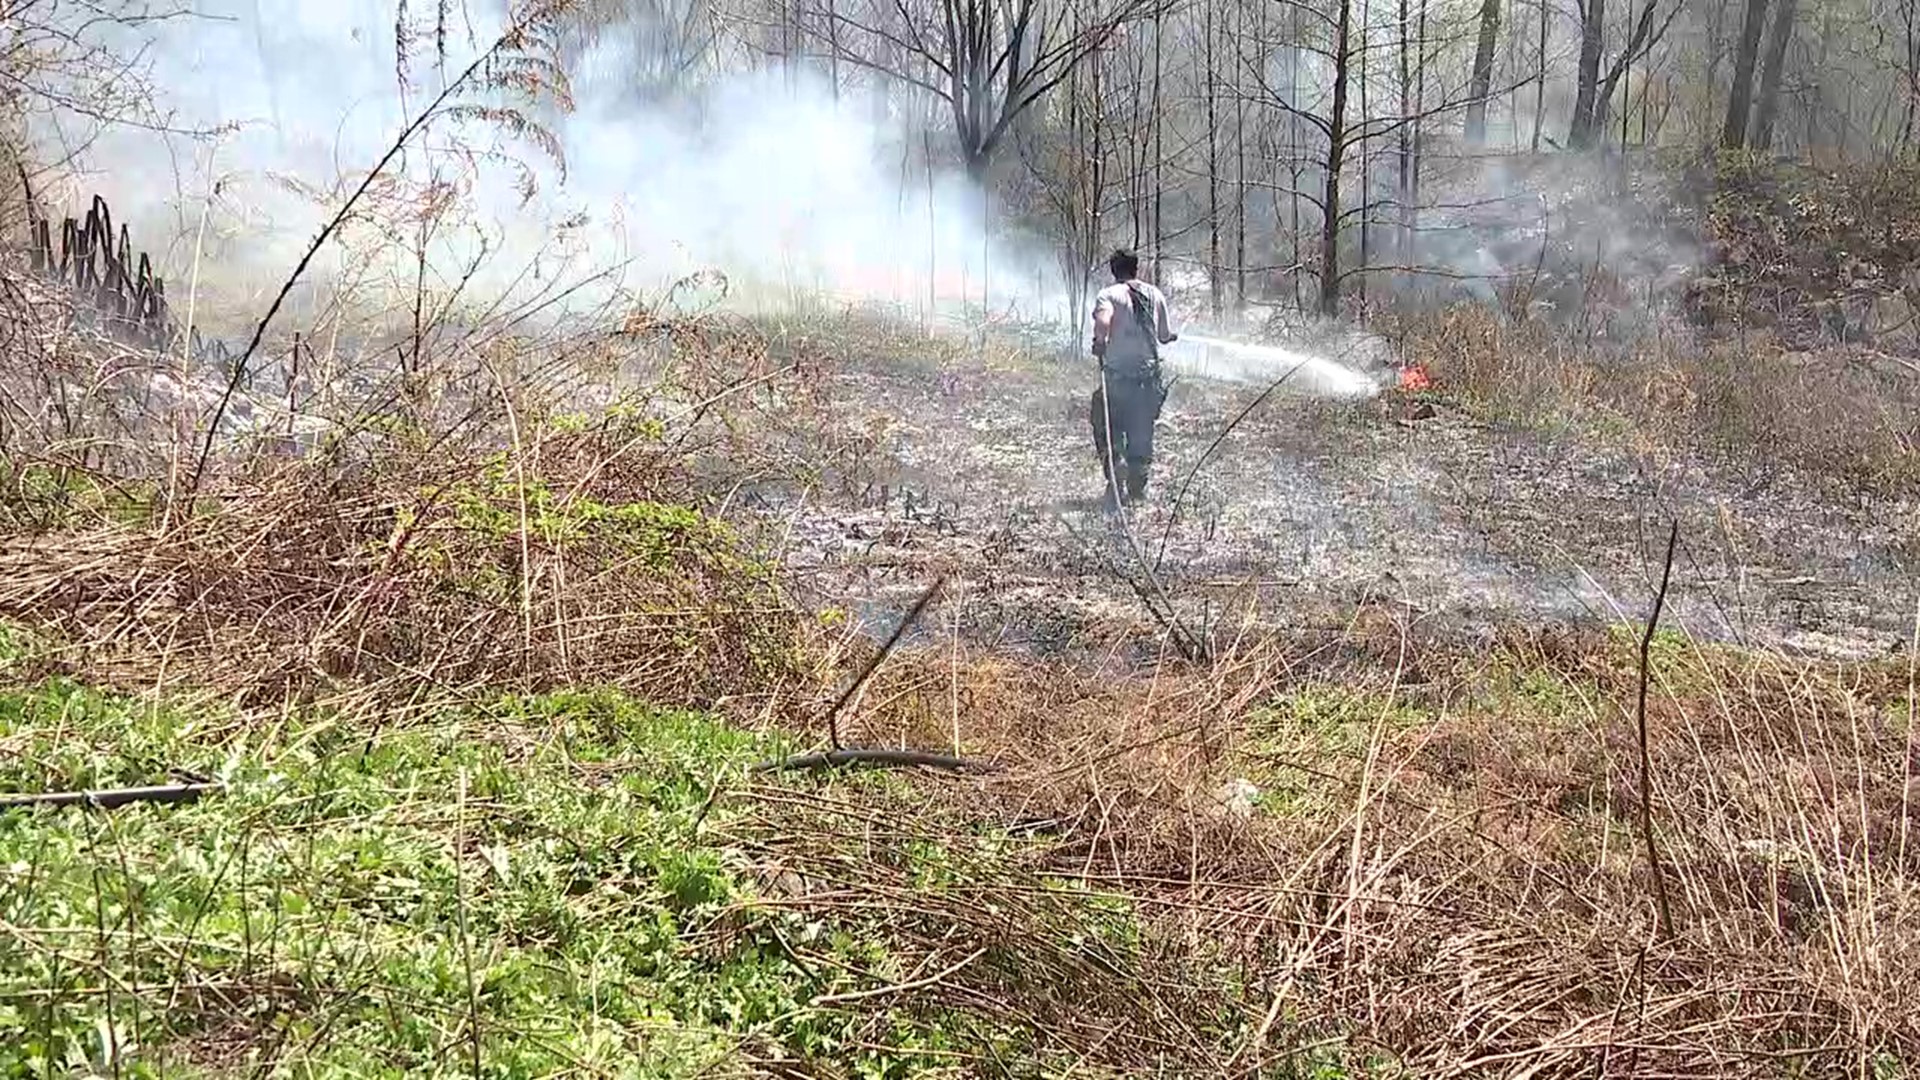 A wooded area off North Main Street in Taylor caught fire Tuesday morning.